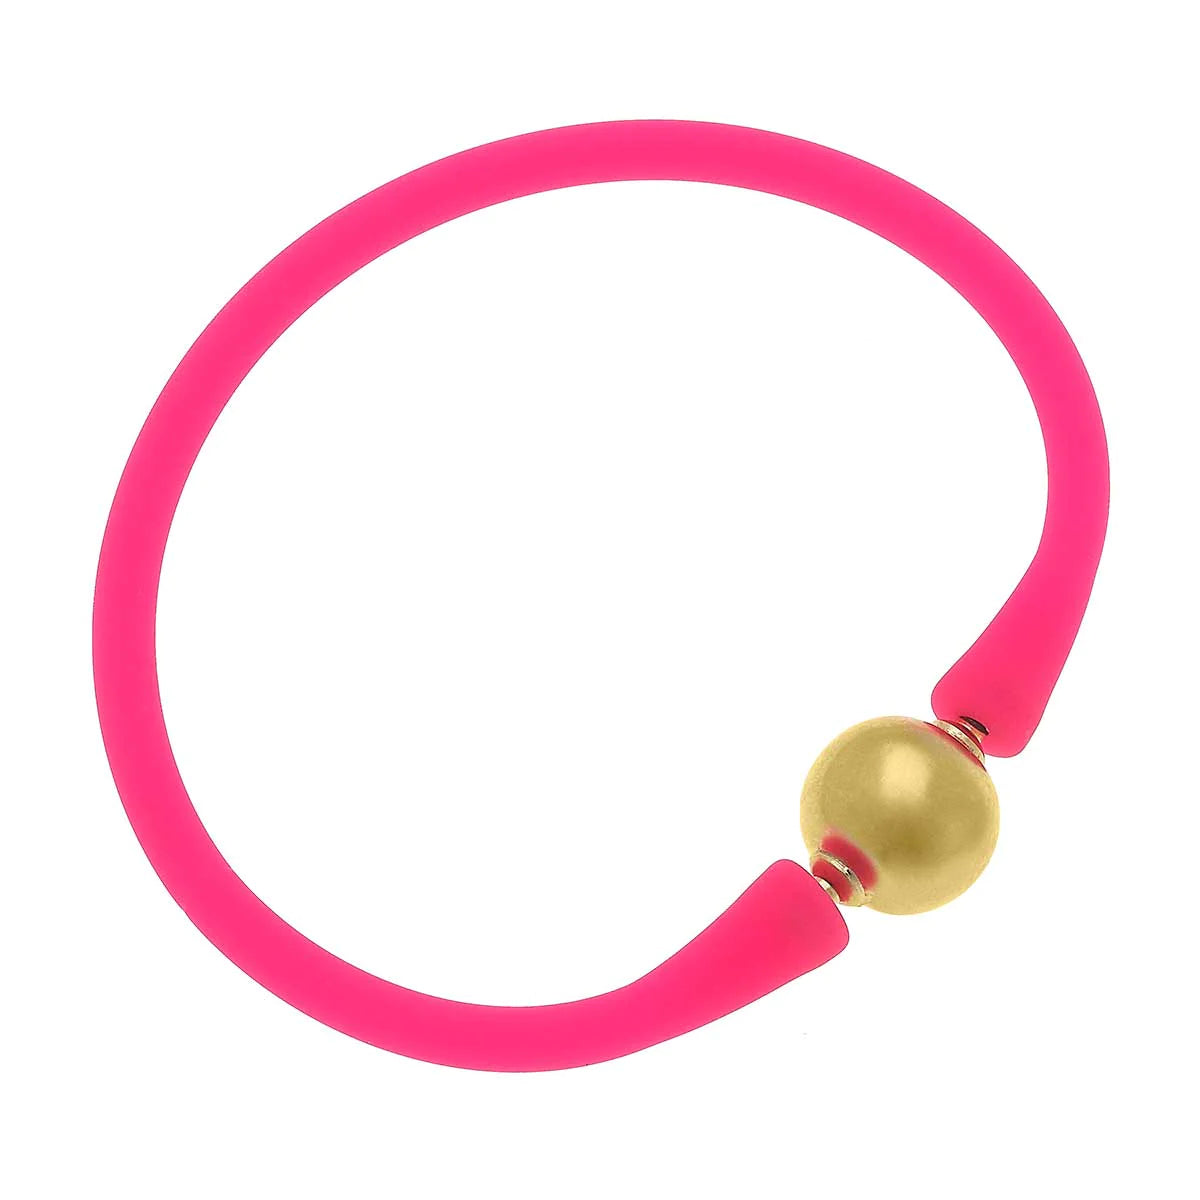 Bali 24K Gold Plated Ball Bead Silicone Bracelet in Neon Pink